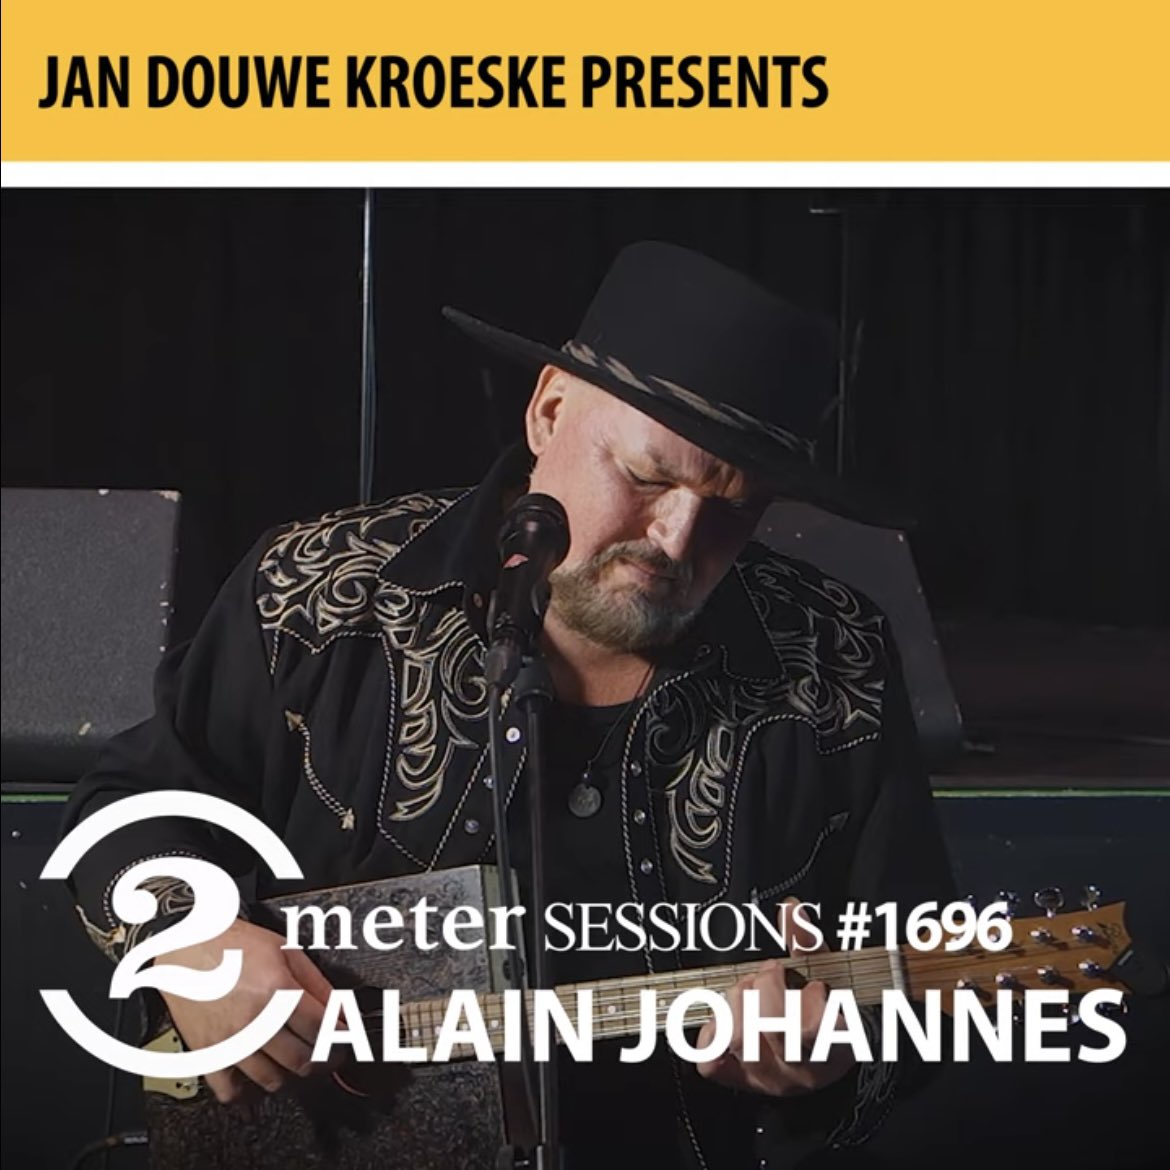 #EarthTunes 30. Free choice/world Alain Johannes - Kaleidoscope One of my absolute favorite songs Recklessly She opens up the door Stepping in Morpheus awakened Falling up A starry trail o' crumbs Leading back To when the world was shaken youtu.be/DnI3hKlIFkg?si…